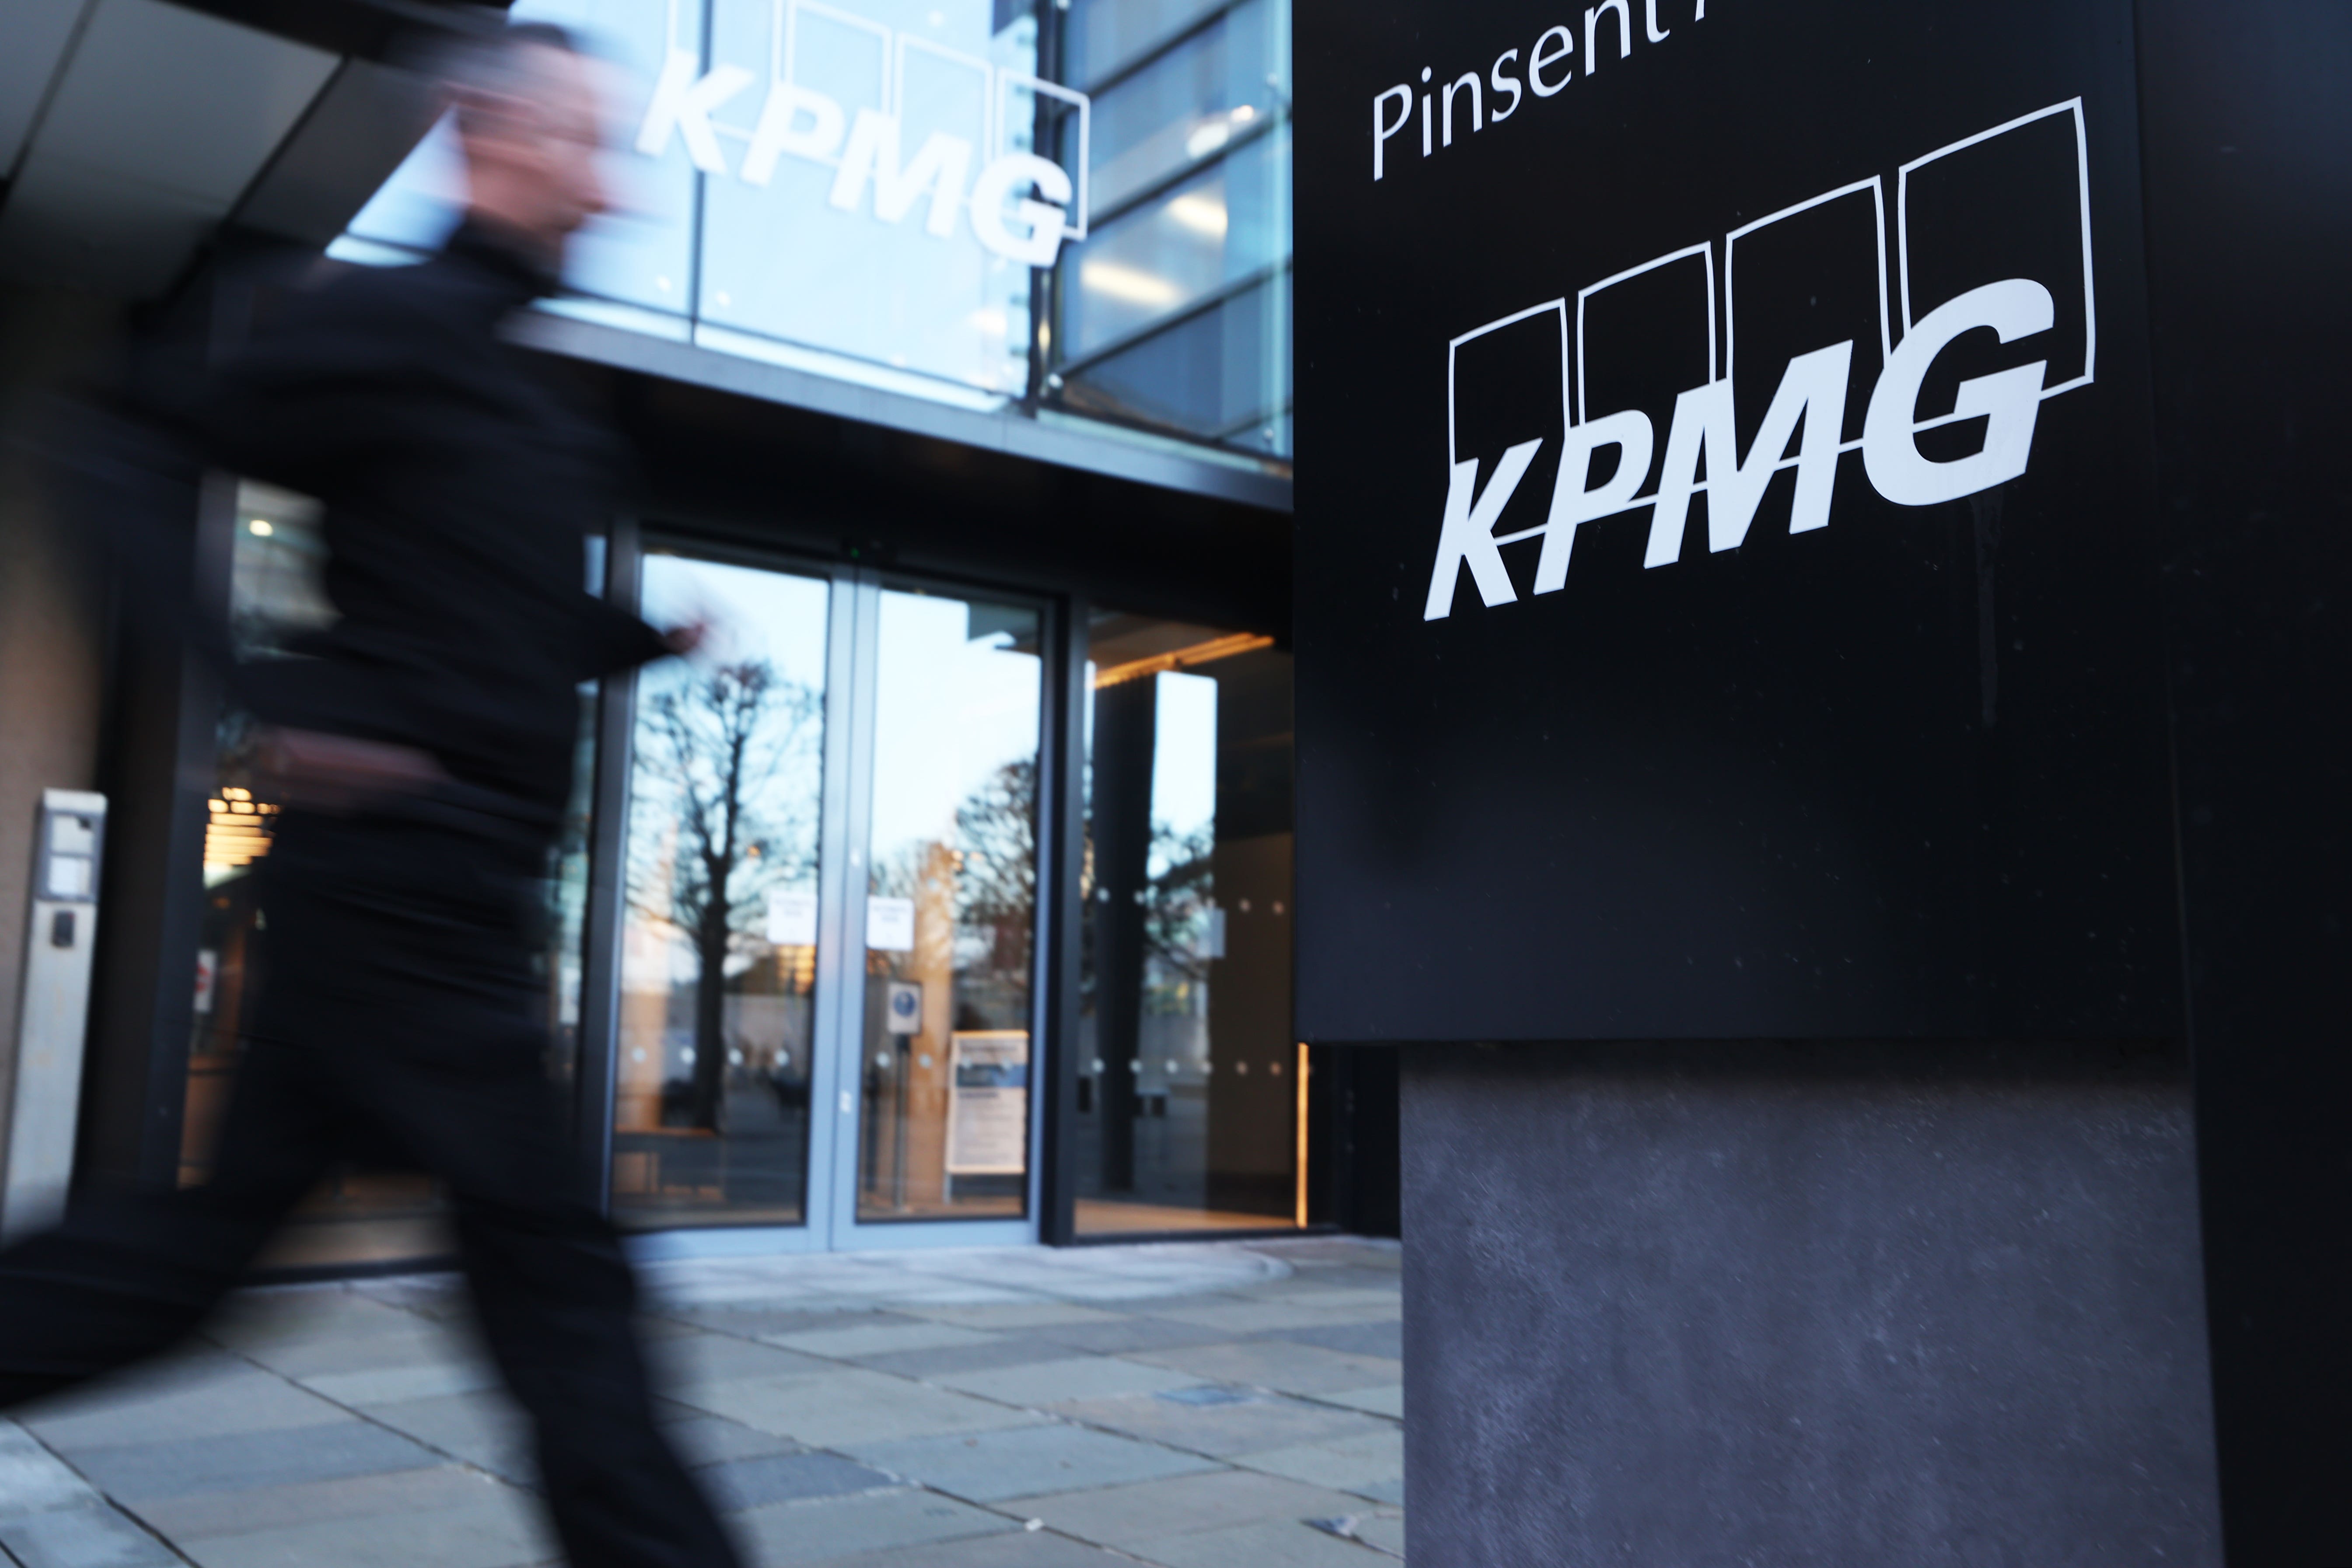 KPMG is one of the so-called ‘Big Four’ accountancy firms that between them earned 98 per cent of audit fees from FTSE 350 companies last year